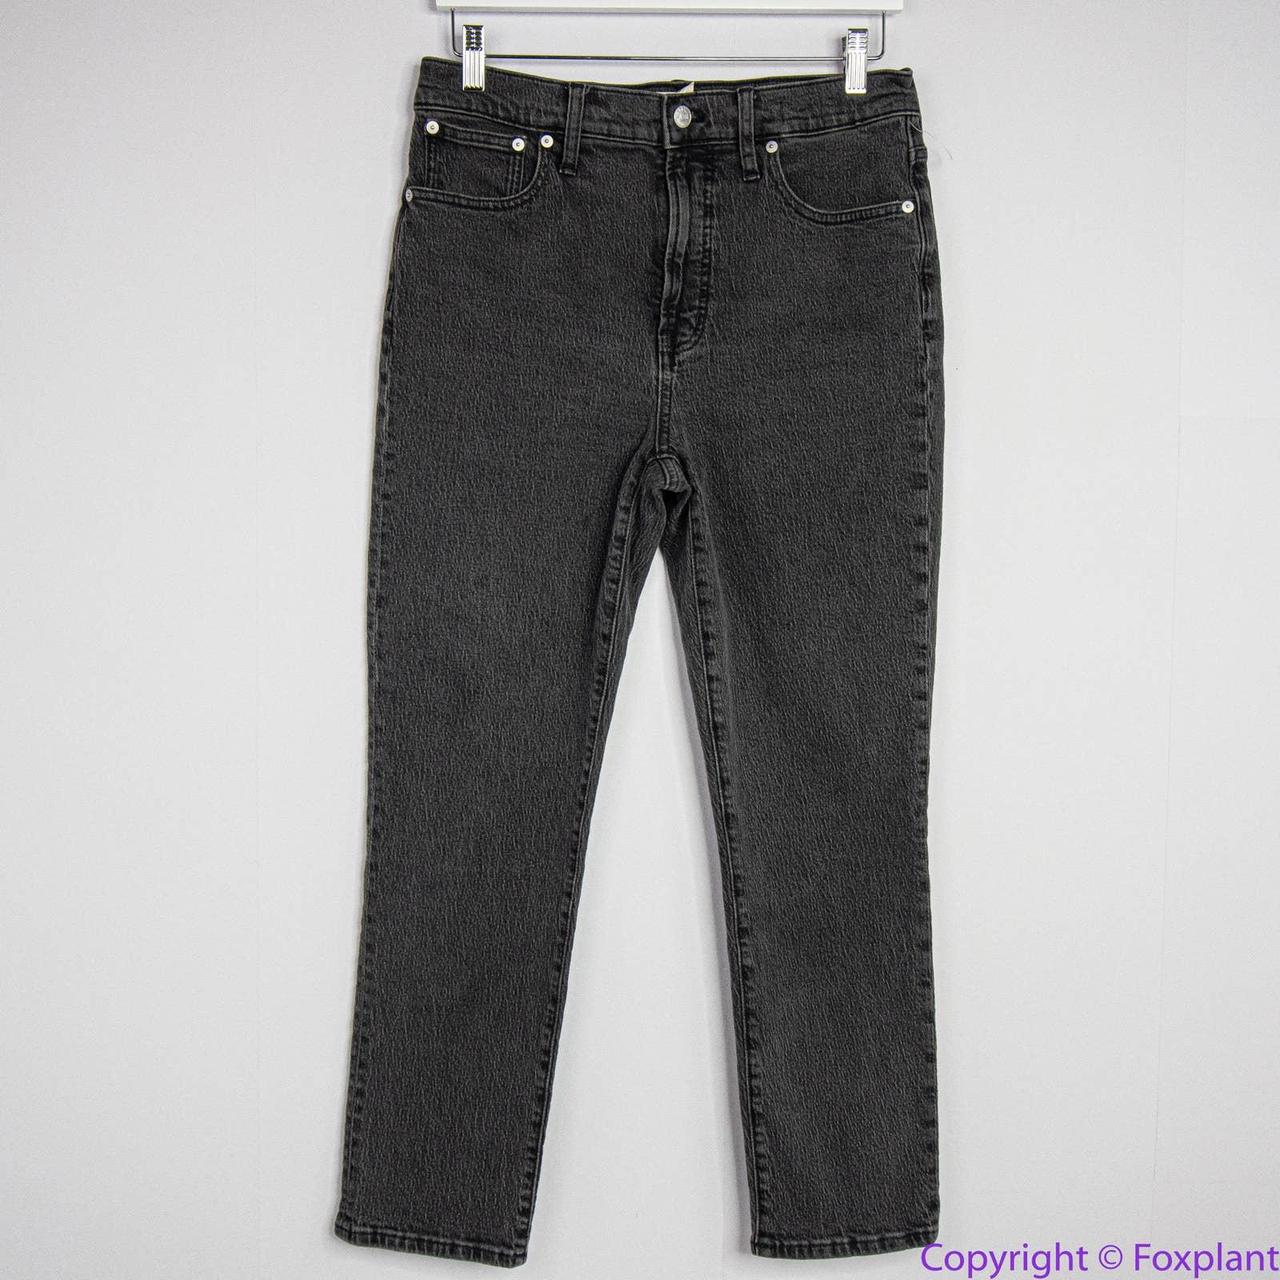 NEW Madewell The Perfect Vintage Jean in lunar wash,... - Depop